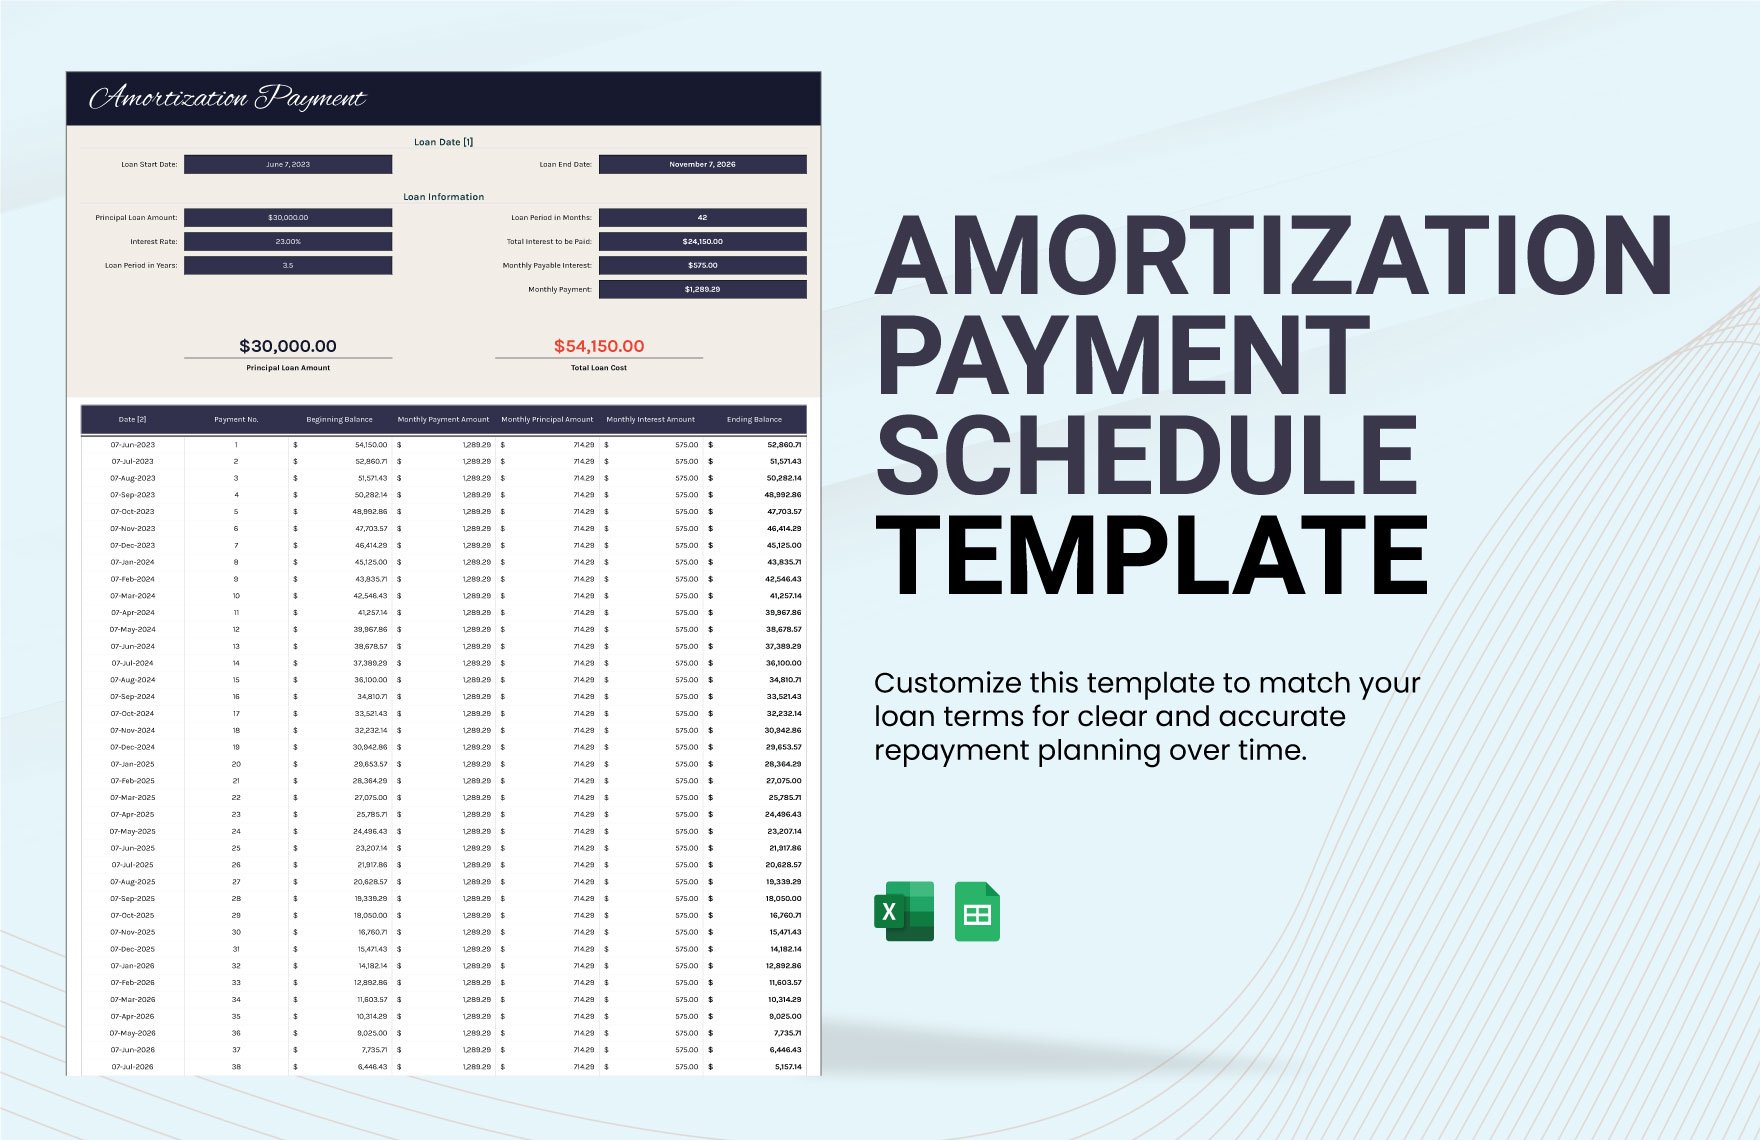 Amortization Payment Schedule Template in Excel, Google Sheets